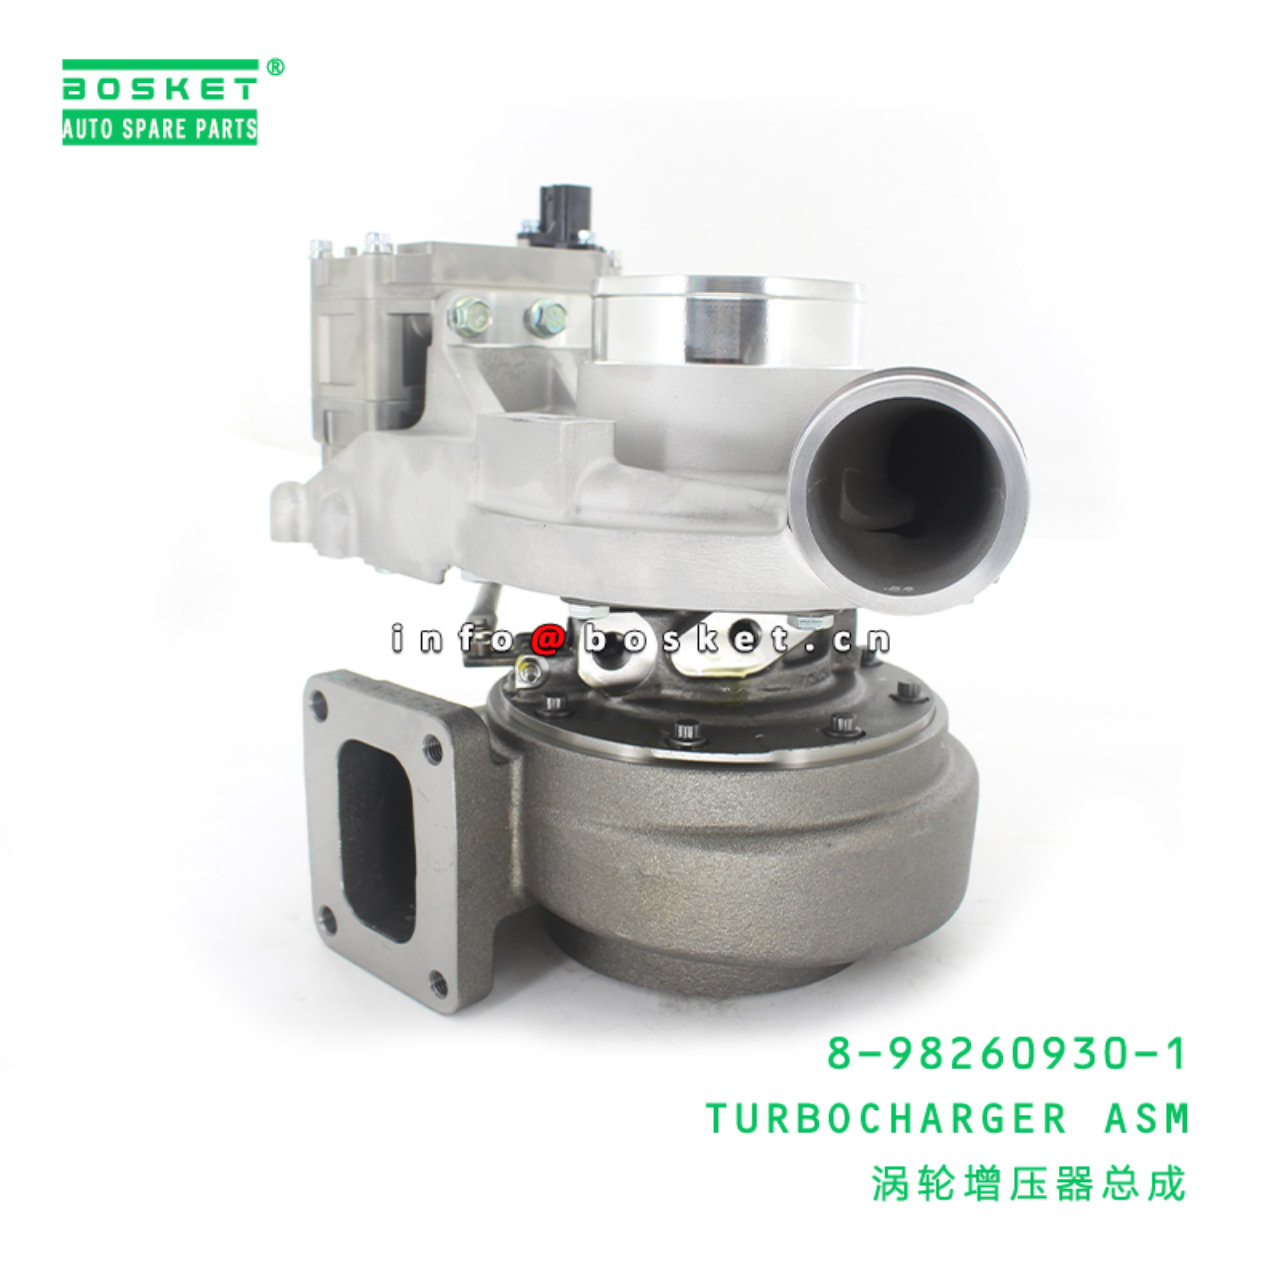 8-98260930-1 Turbocharger Assembly Suitable for ISUZU 6HK1 8982609301